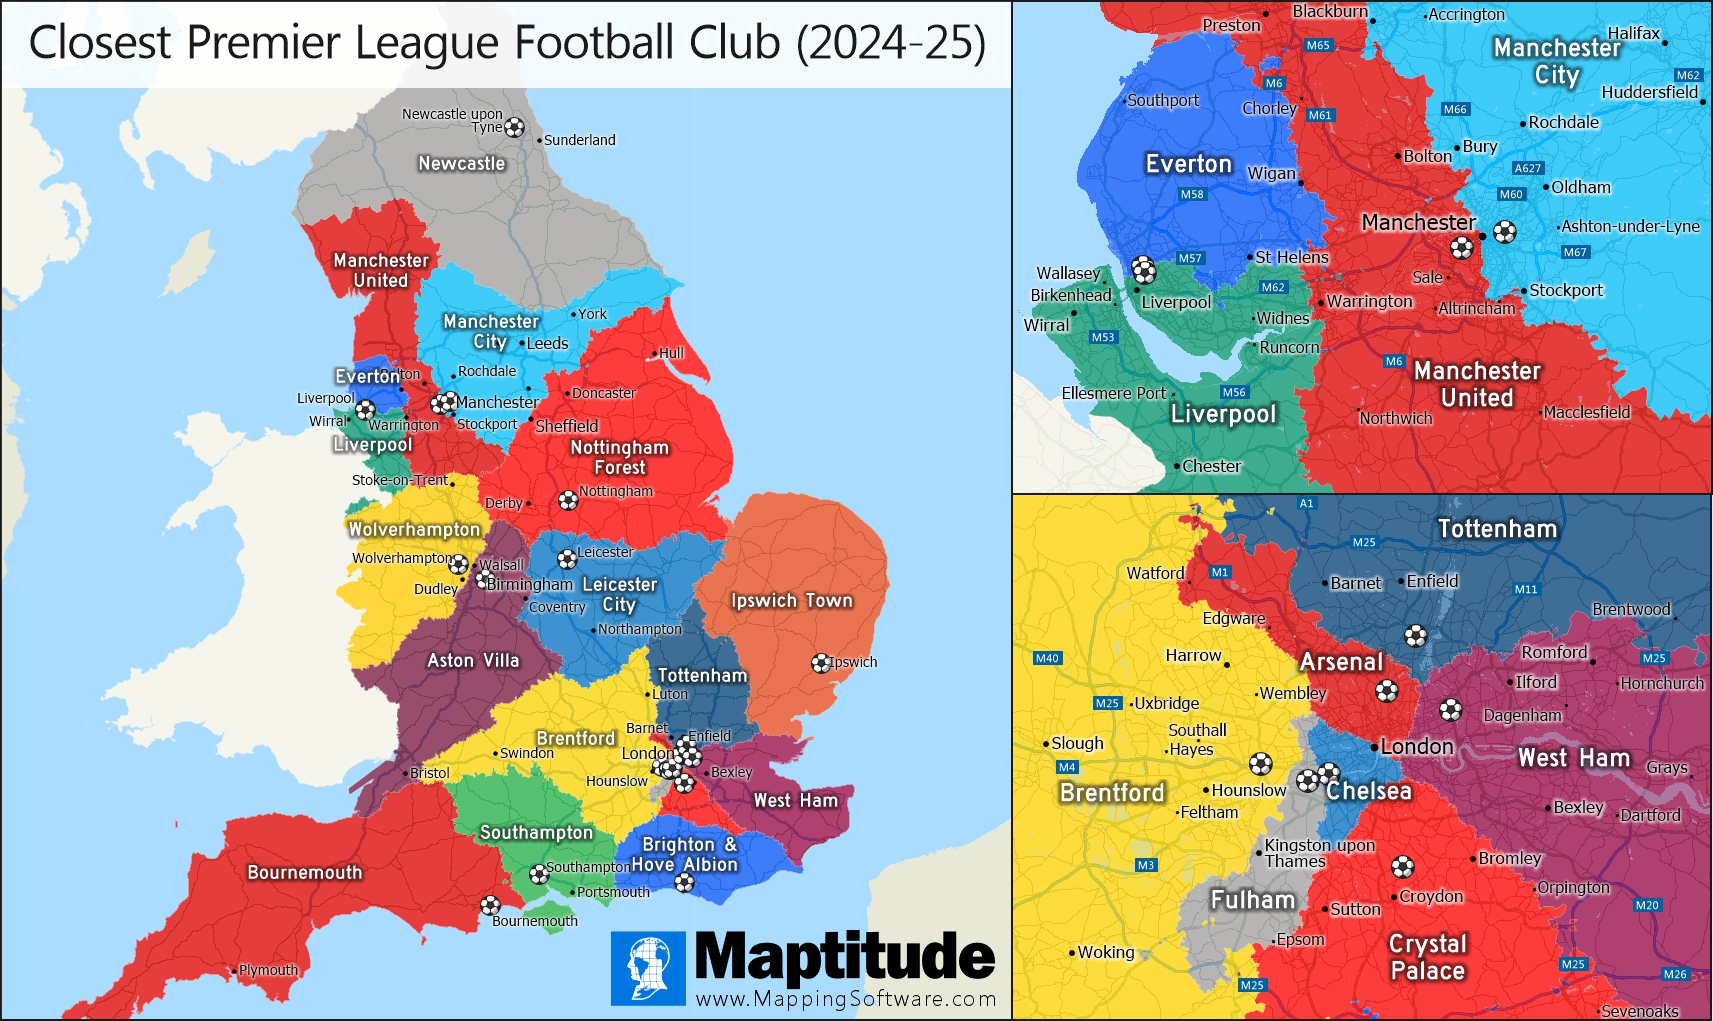 Maptitude map showing England divided into areas based on the closest Premier League football club by drive-time